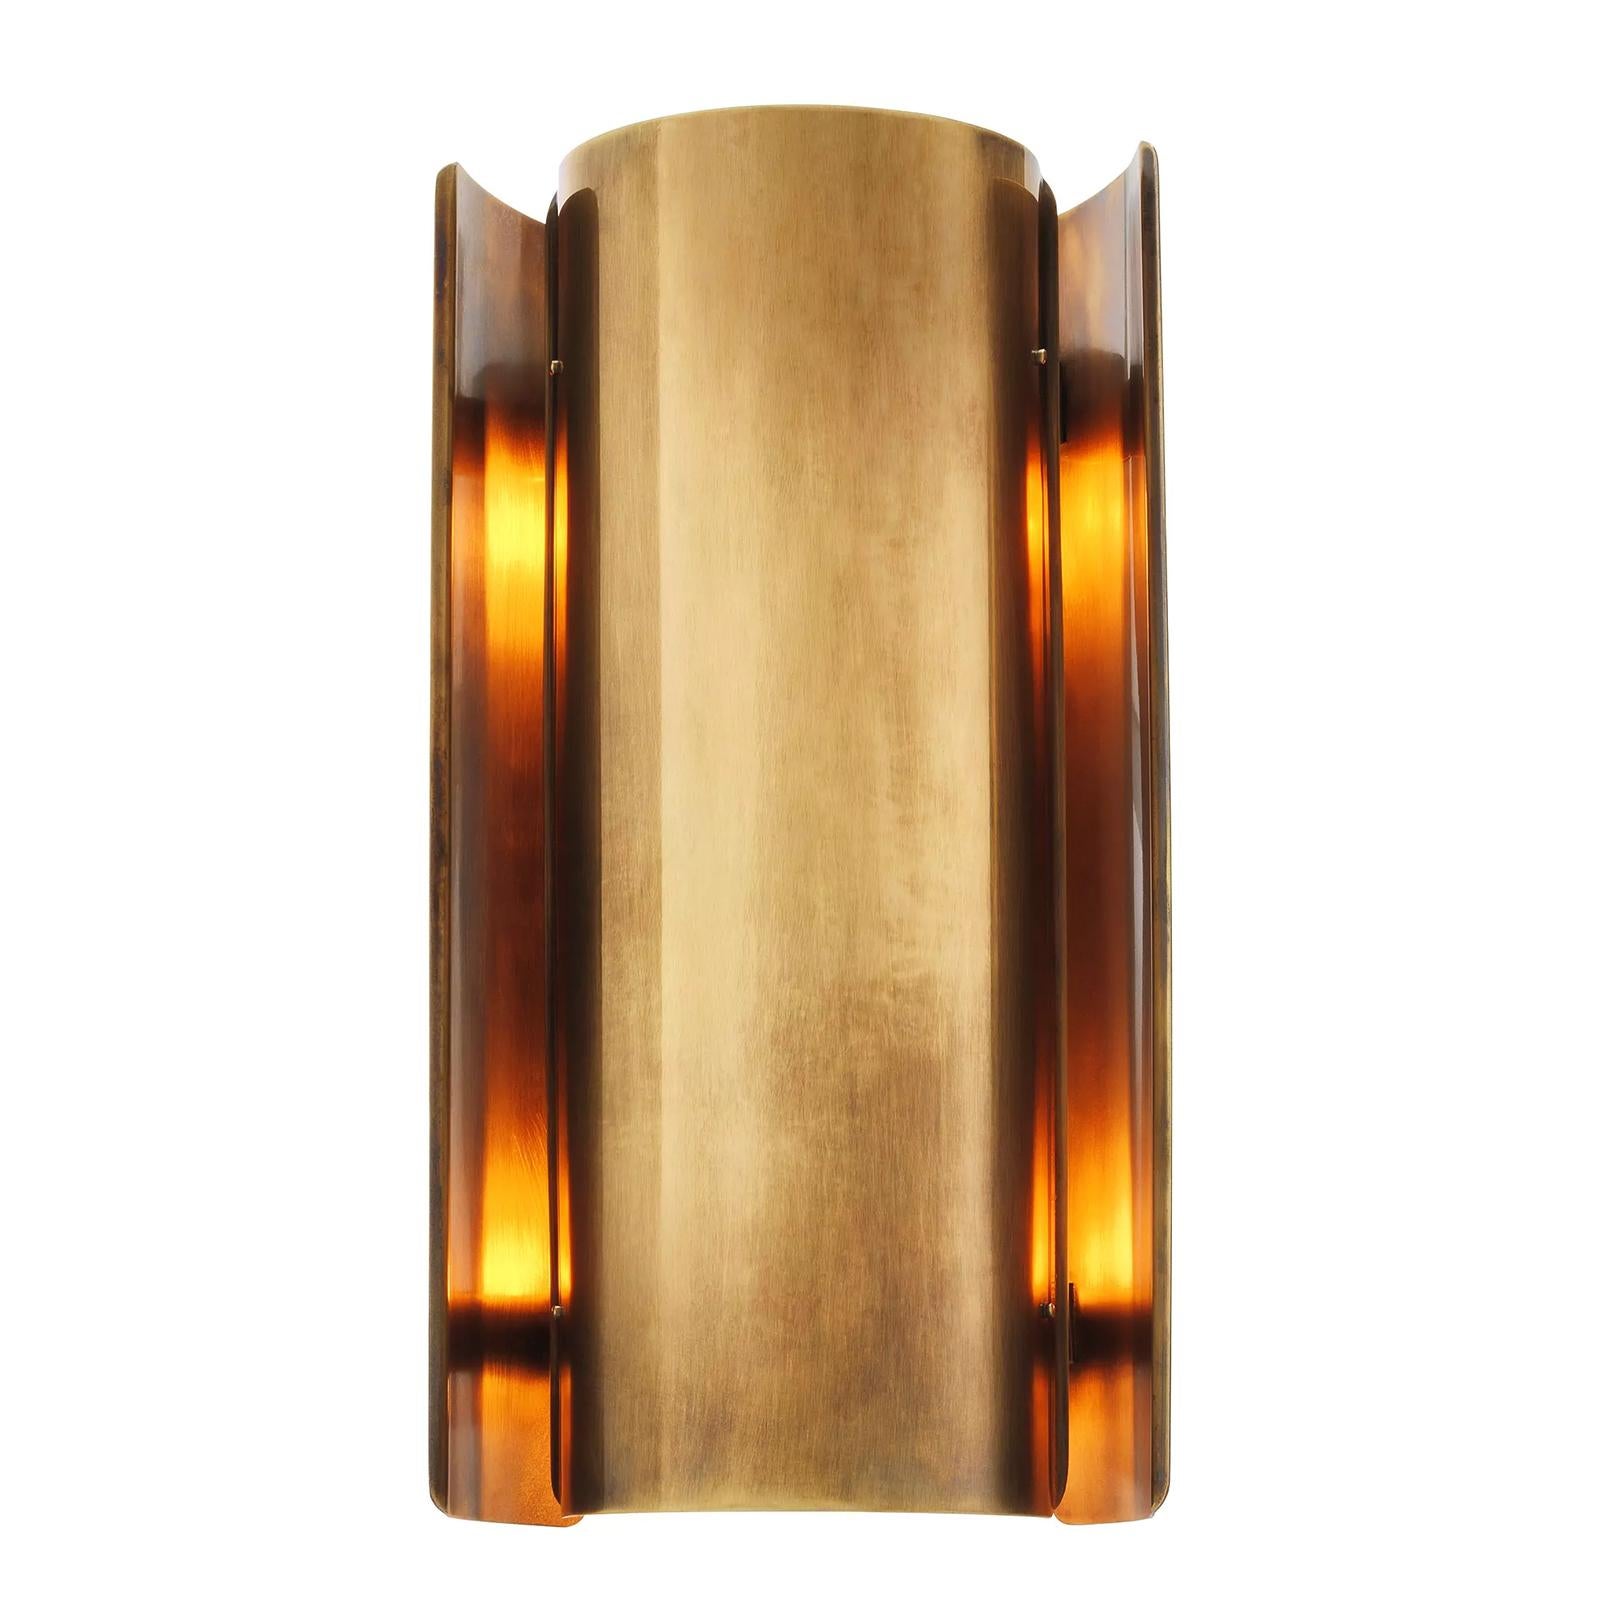 Wall Lamp Betty Medium with all structure in steel, iron and solid brass
in vintage finish. With 2 bulbs (not included), lamp holder type E14, 
Max 40 watt, dimmable (dimmer not included).